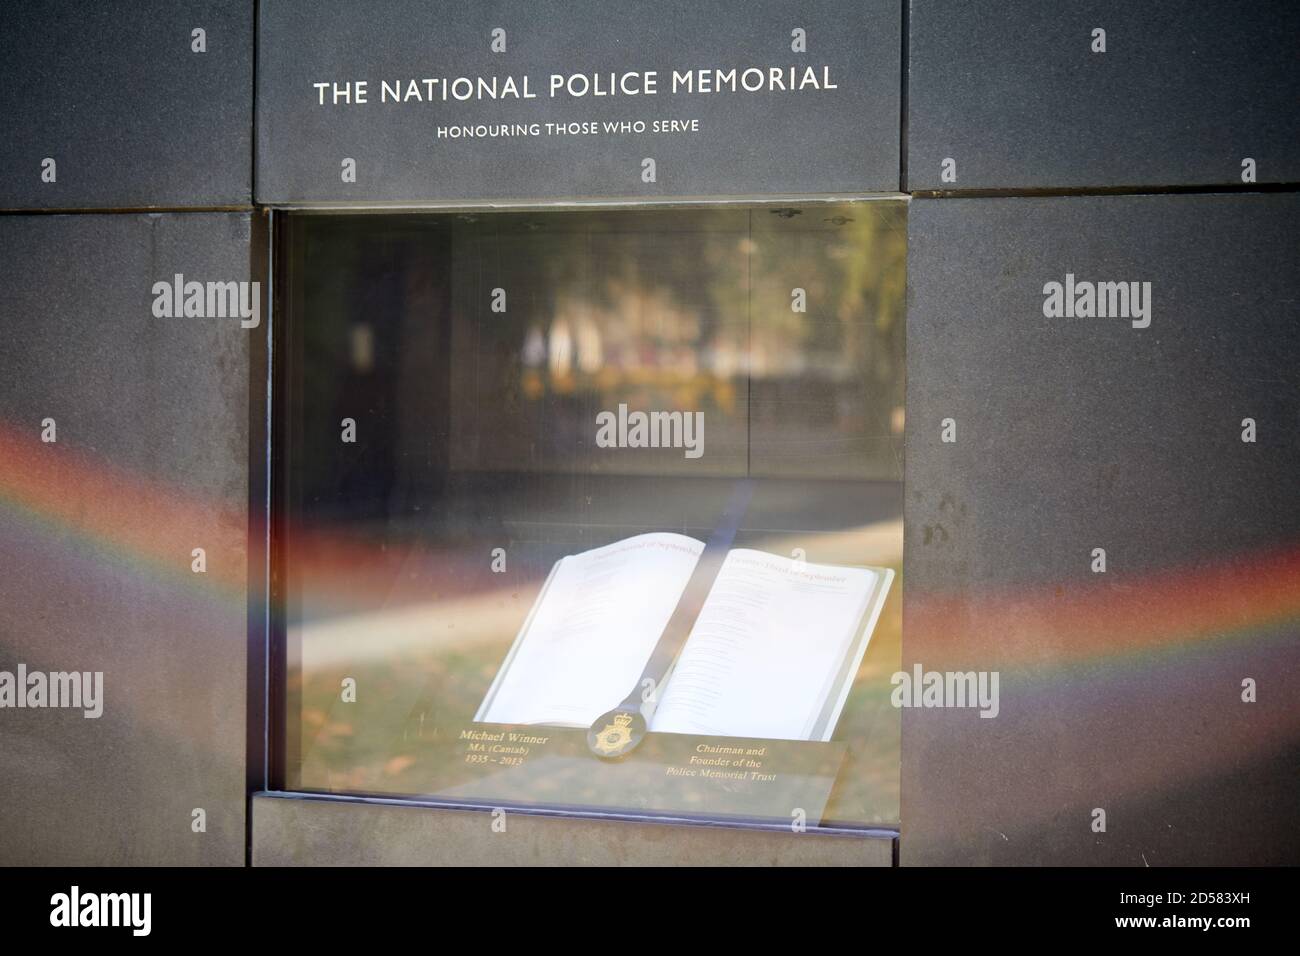 London, UK. - 22 Sept 2020: The National Police Memorial on The Mall. The Memorial, unveiled in 2005, was designed by Lord Foster and Per Arnoldi and Stock Photo